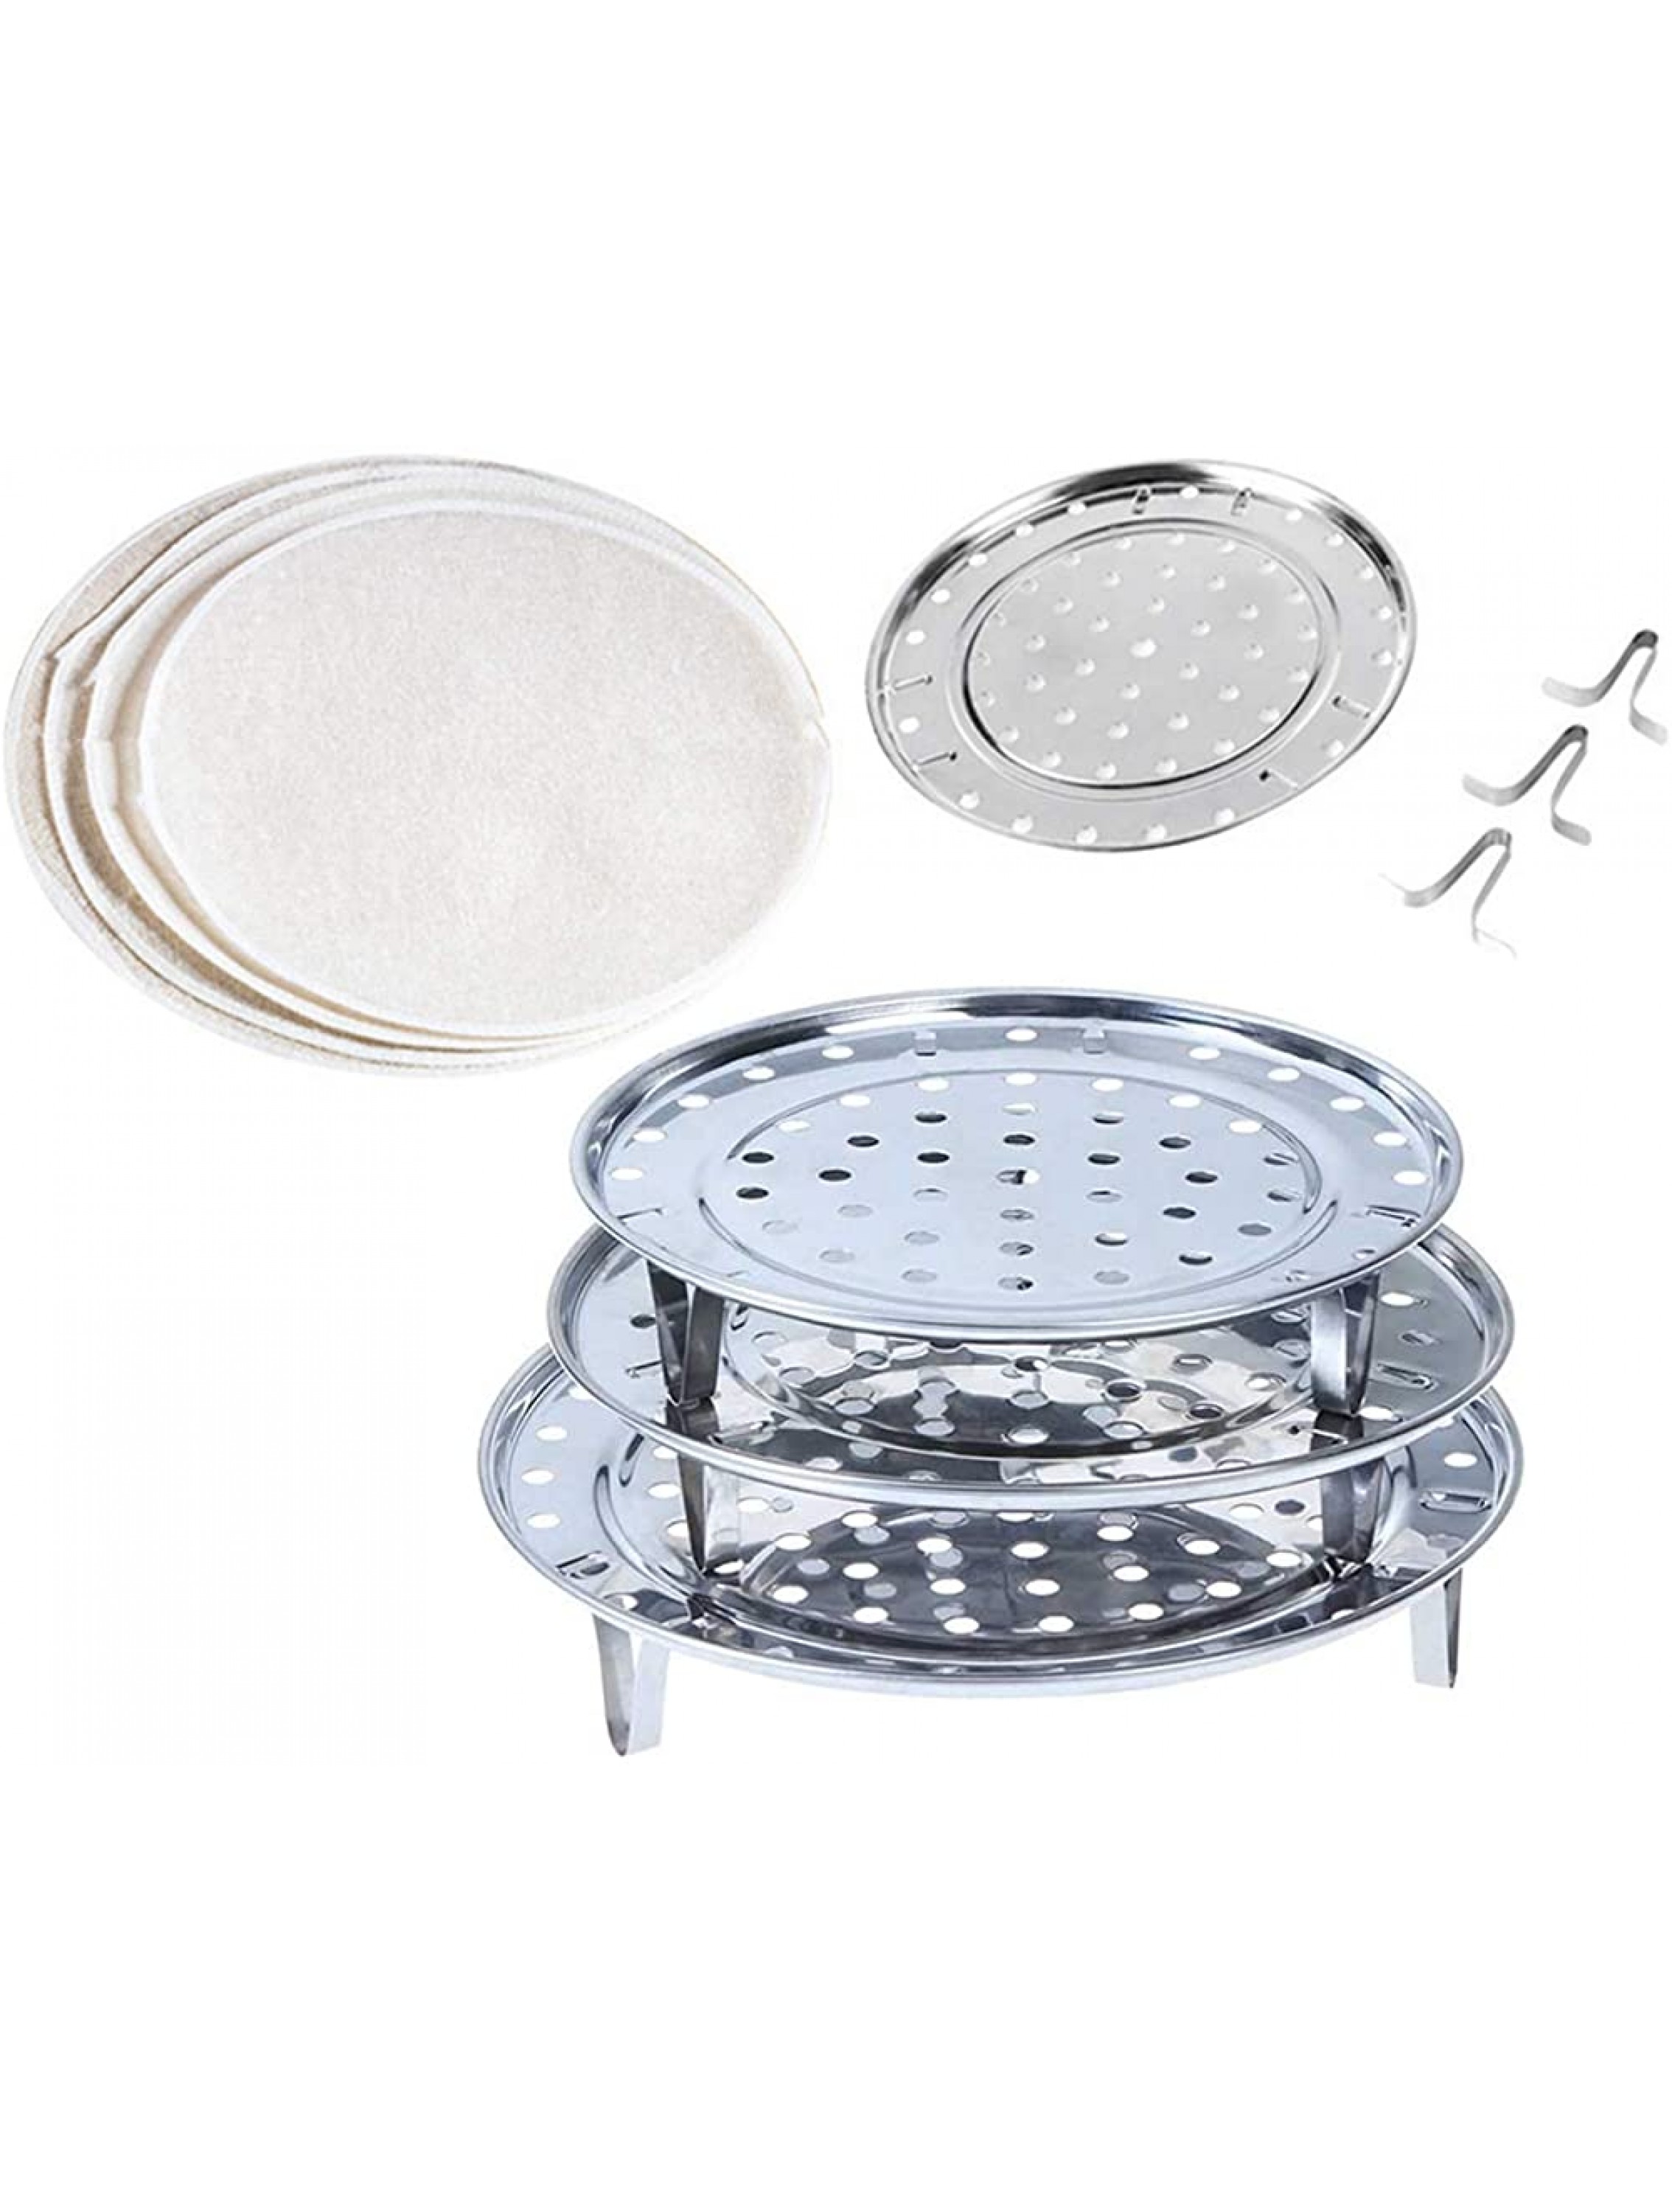 3-Pack 10 11 11 3 4 Pressure Cooker Canner Rack Baking Steaming Rack,Cake Cooling Rack,1 3 4 Tall Trivet Rack Stand with 15 Pcs Round Breathable Cotton Cloth for Food Steam Basket Rack,Stackable - BJVBDZZPY